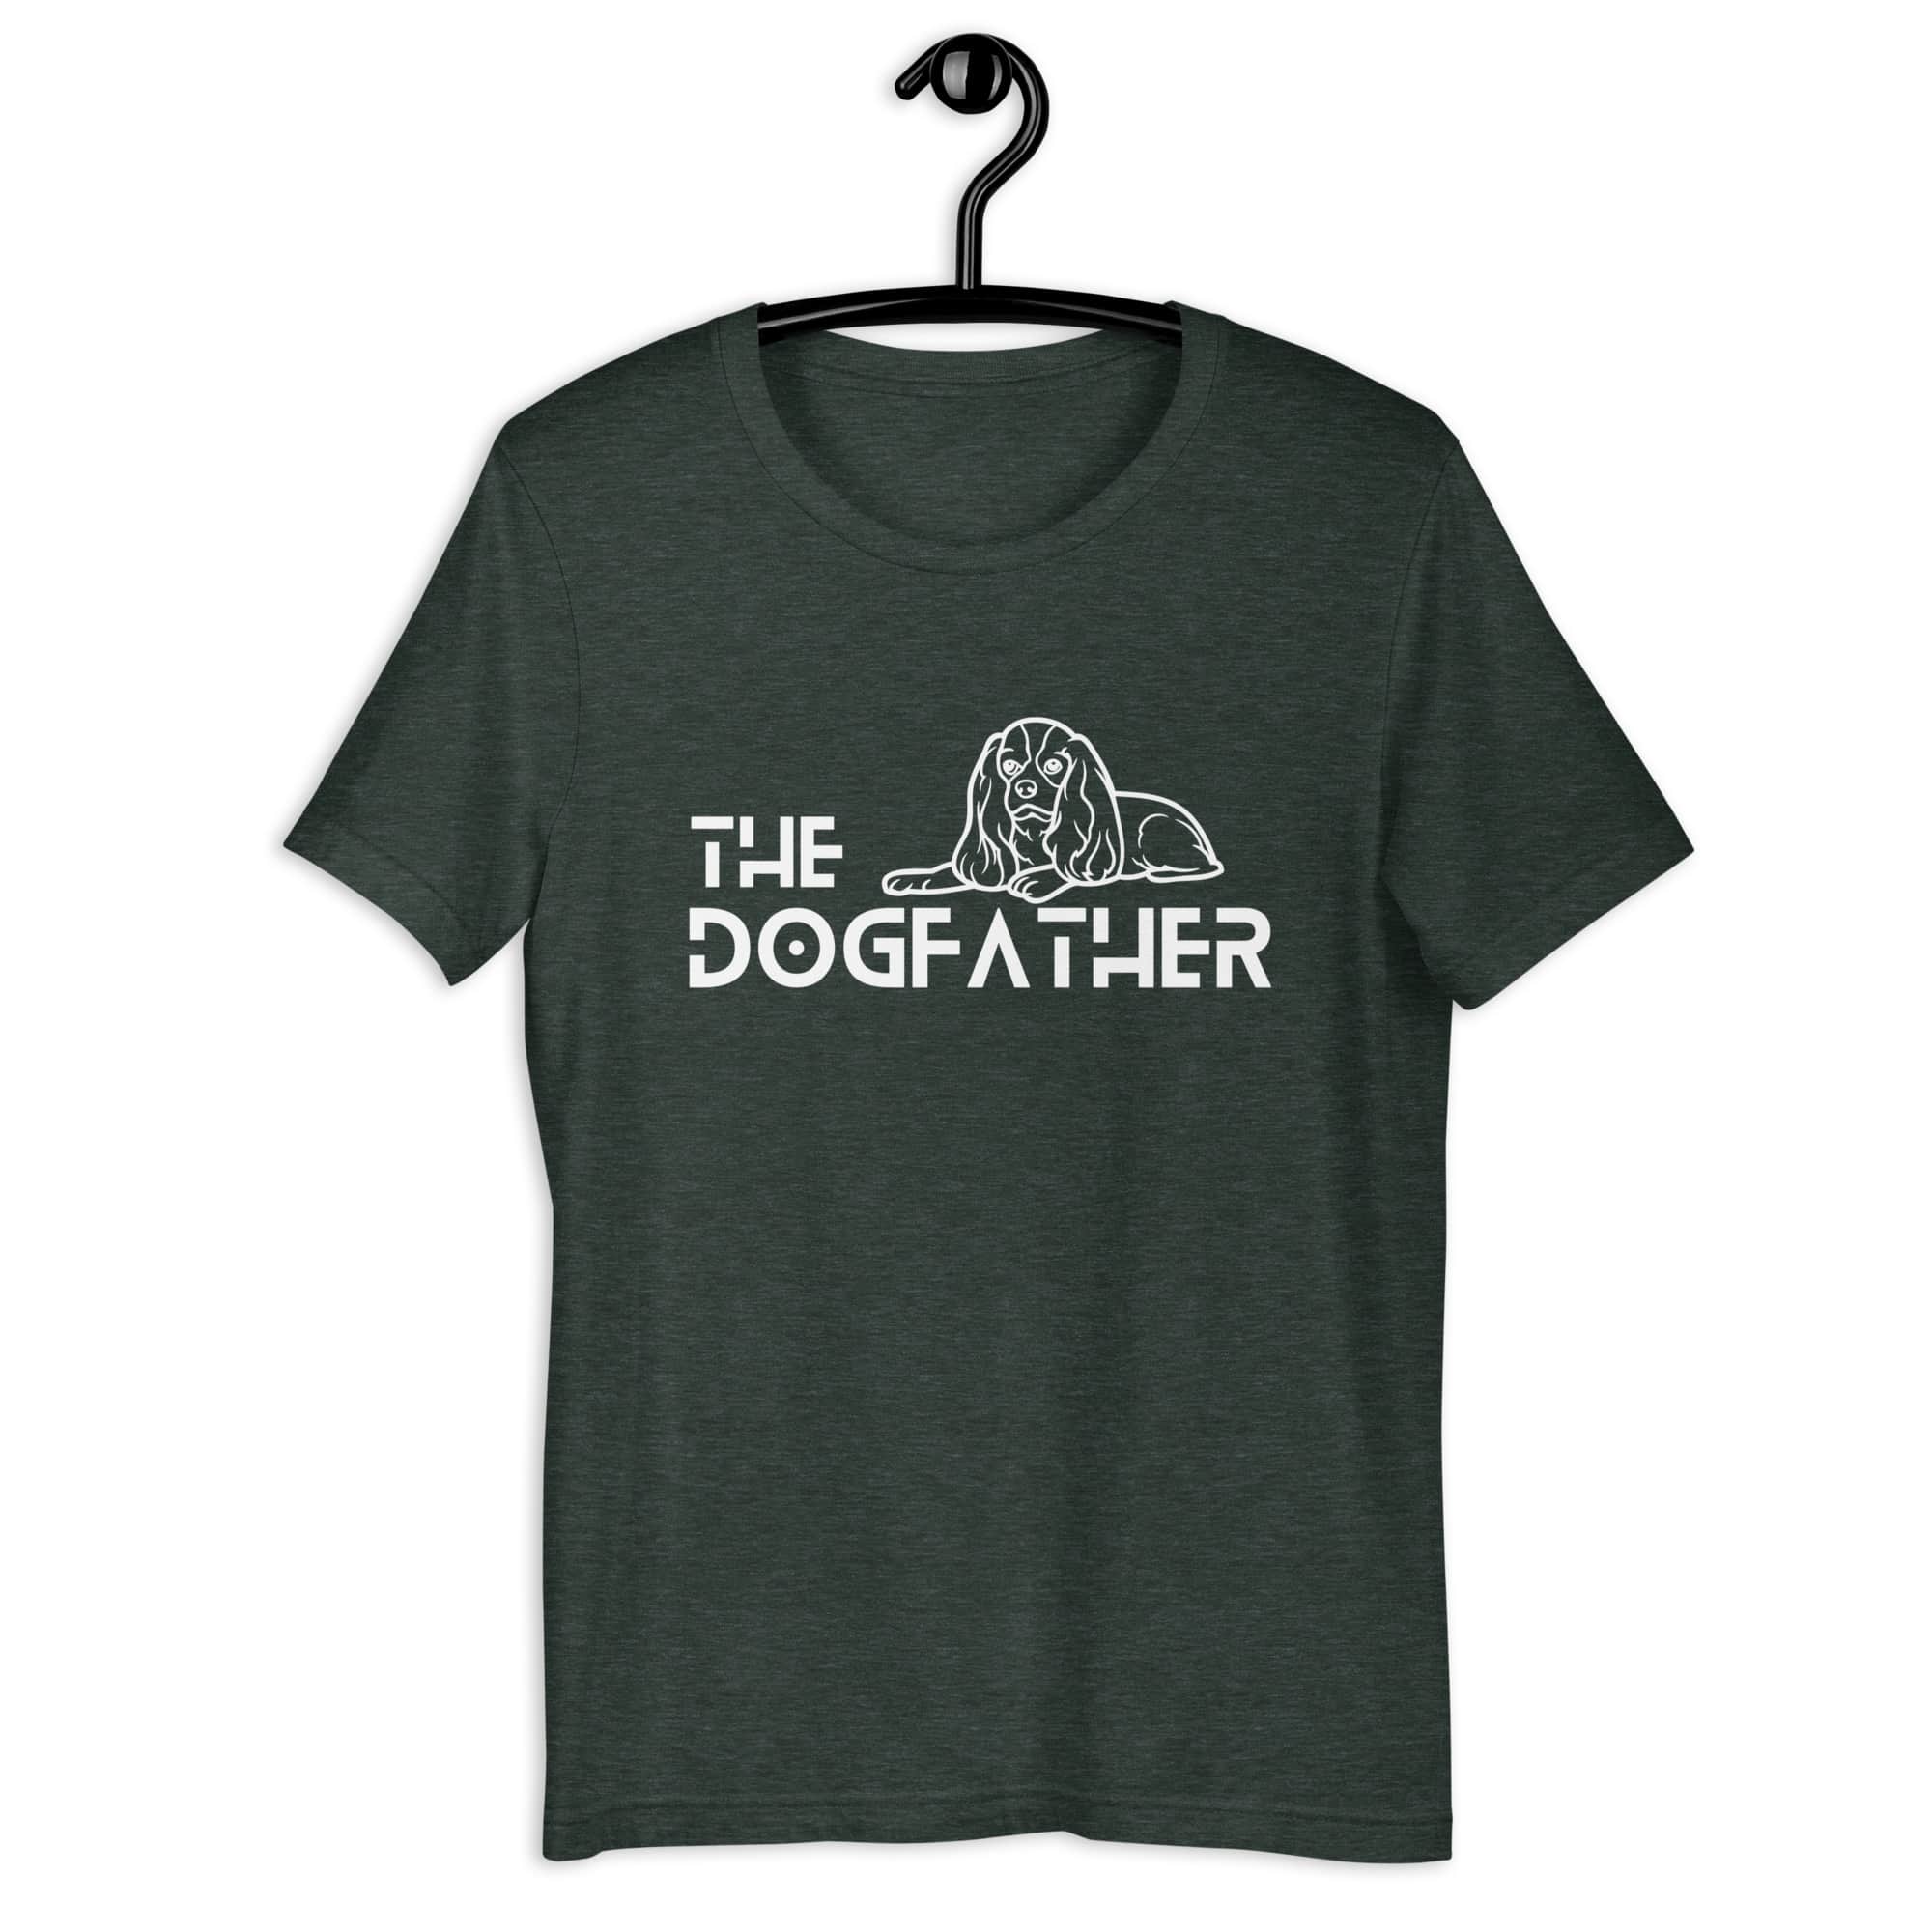 The Dogfather Hounds Unisex T-Shirt. Heather Forest